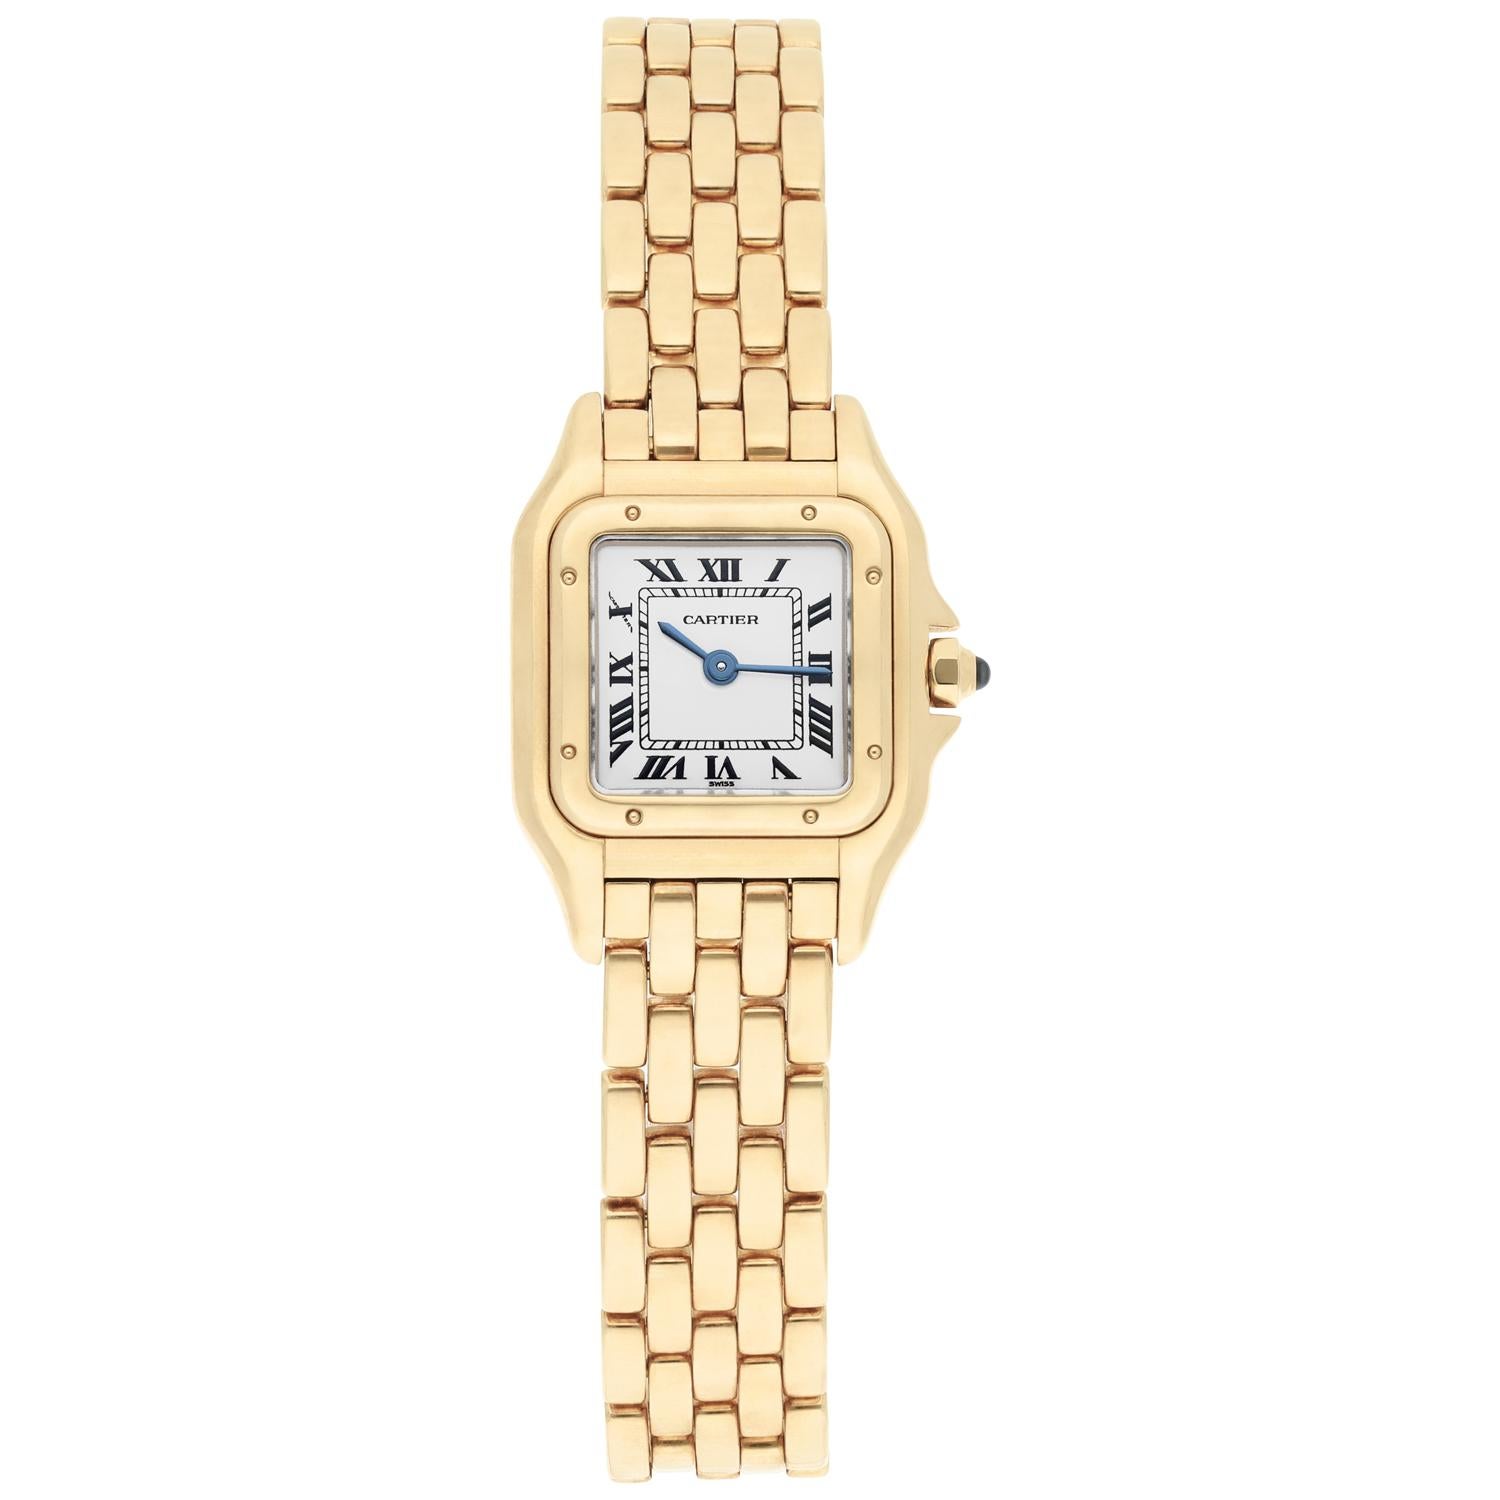 This Cartier Ladies Panthere wristwatch is a luxurious and elegant timepiece. Crafted in 18k yellow gold, it features an off-white dial with Roman numeral indices and a fixed yellow bezel. The watch has a quartz movement. It has been professionally